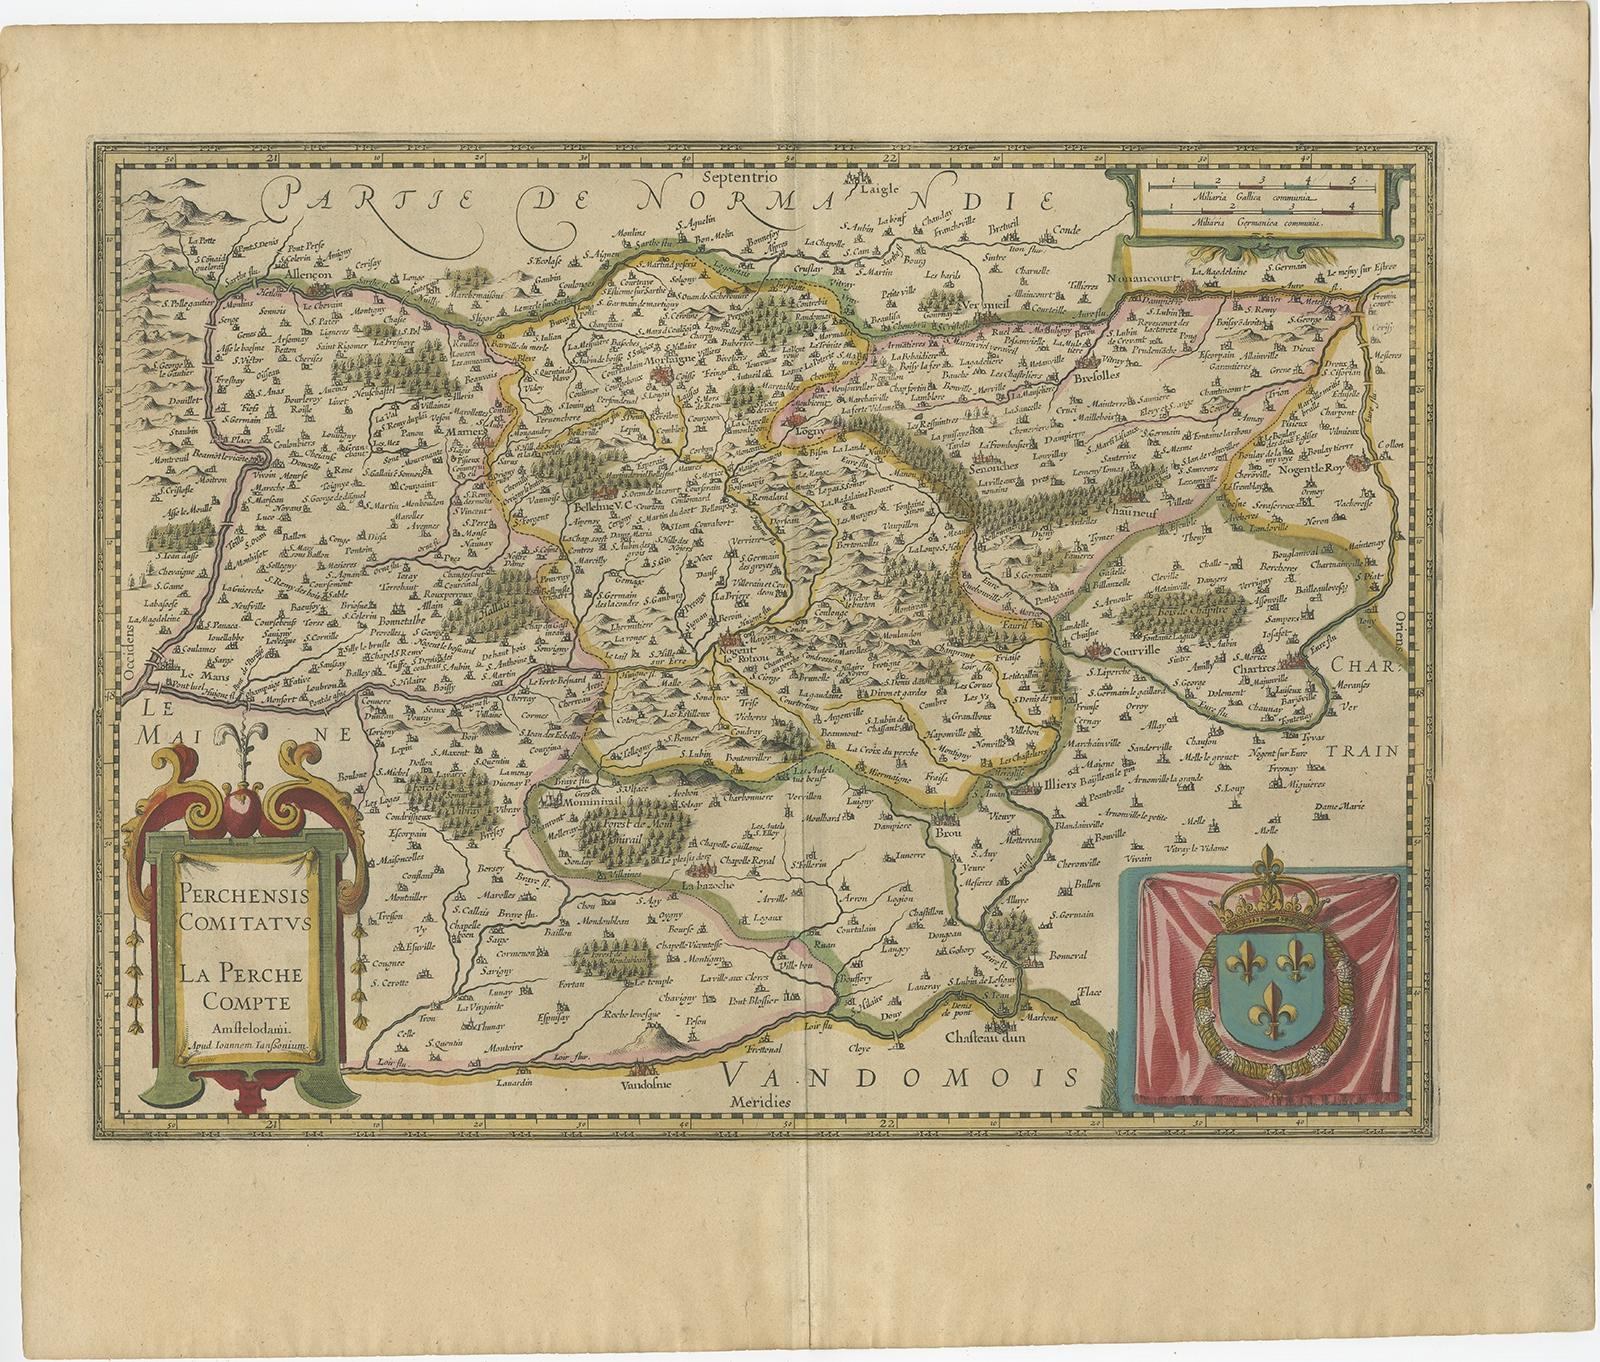 Antique map titled 'Perchensis Comitatus - La Perche compte'. 

Old map of the former province of Perche, France. Until the French Revolution, Perche was bounded by four ancient territories of northwestern France: the provinces of Maine, Normandy,